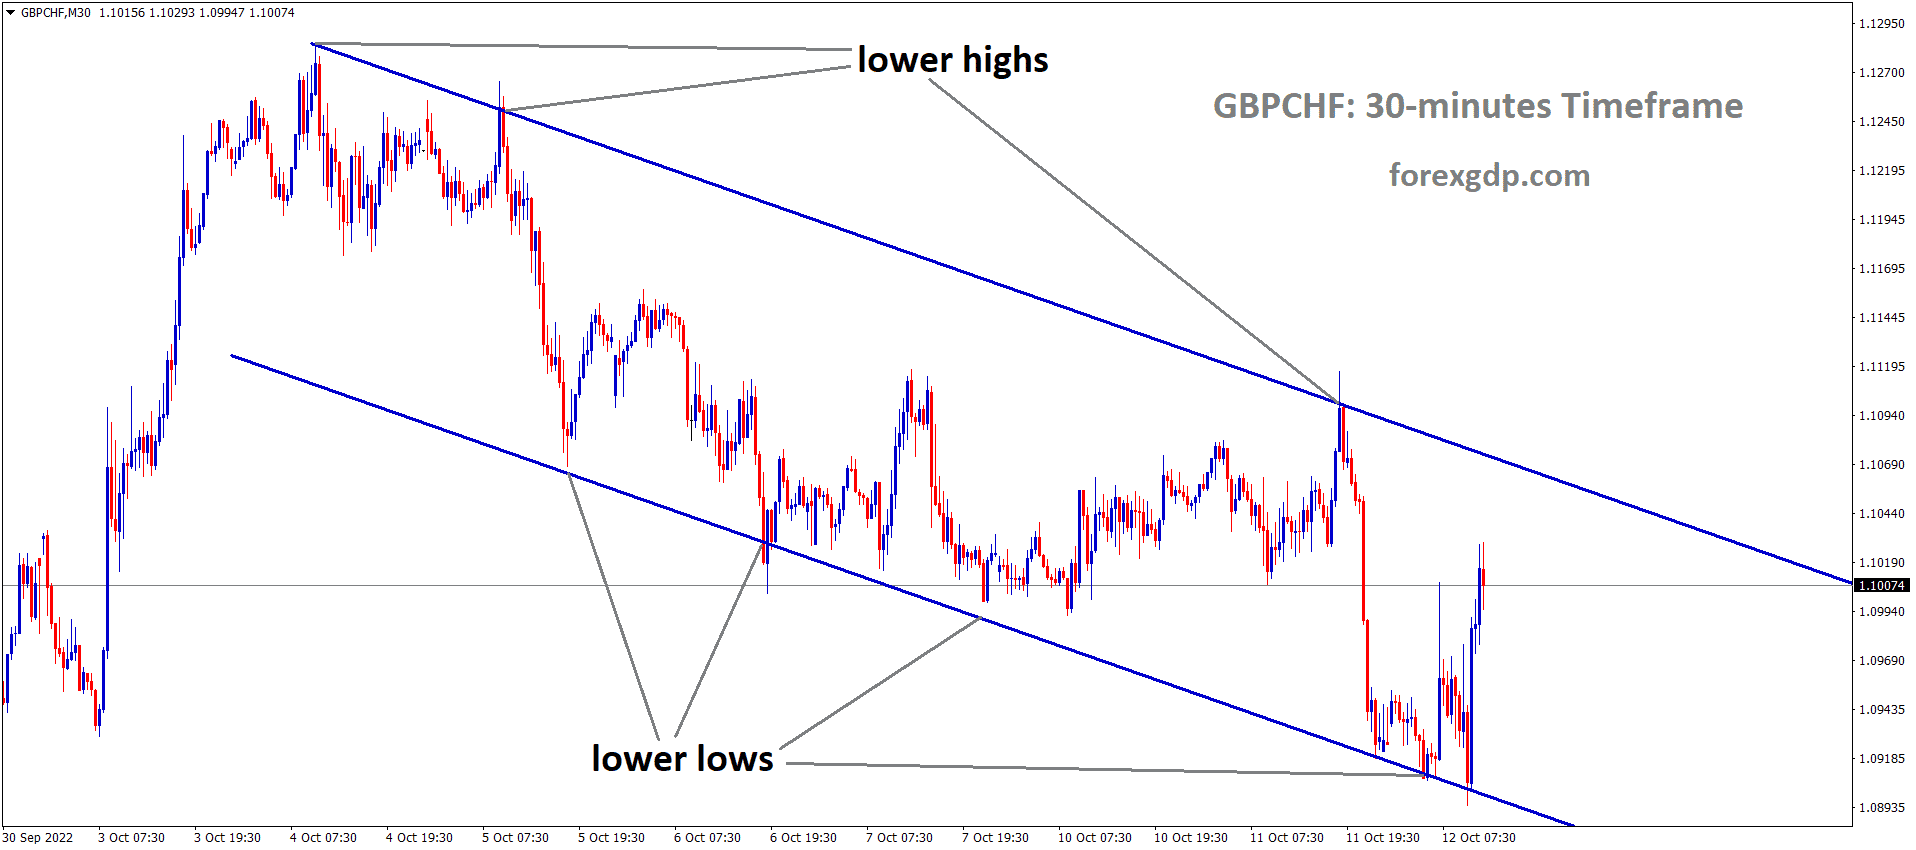 GBPCHF is moving in the Descending channel and the market has rebounded from the lower low area of the channel.